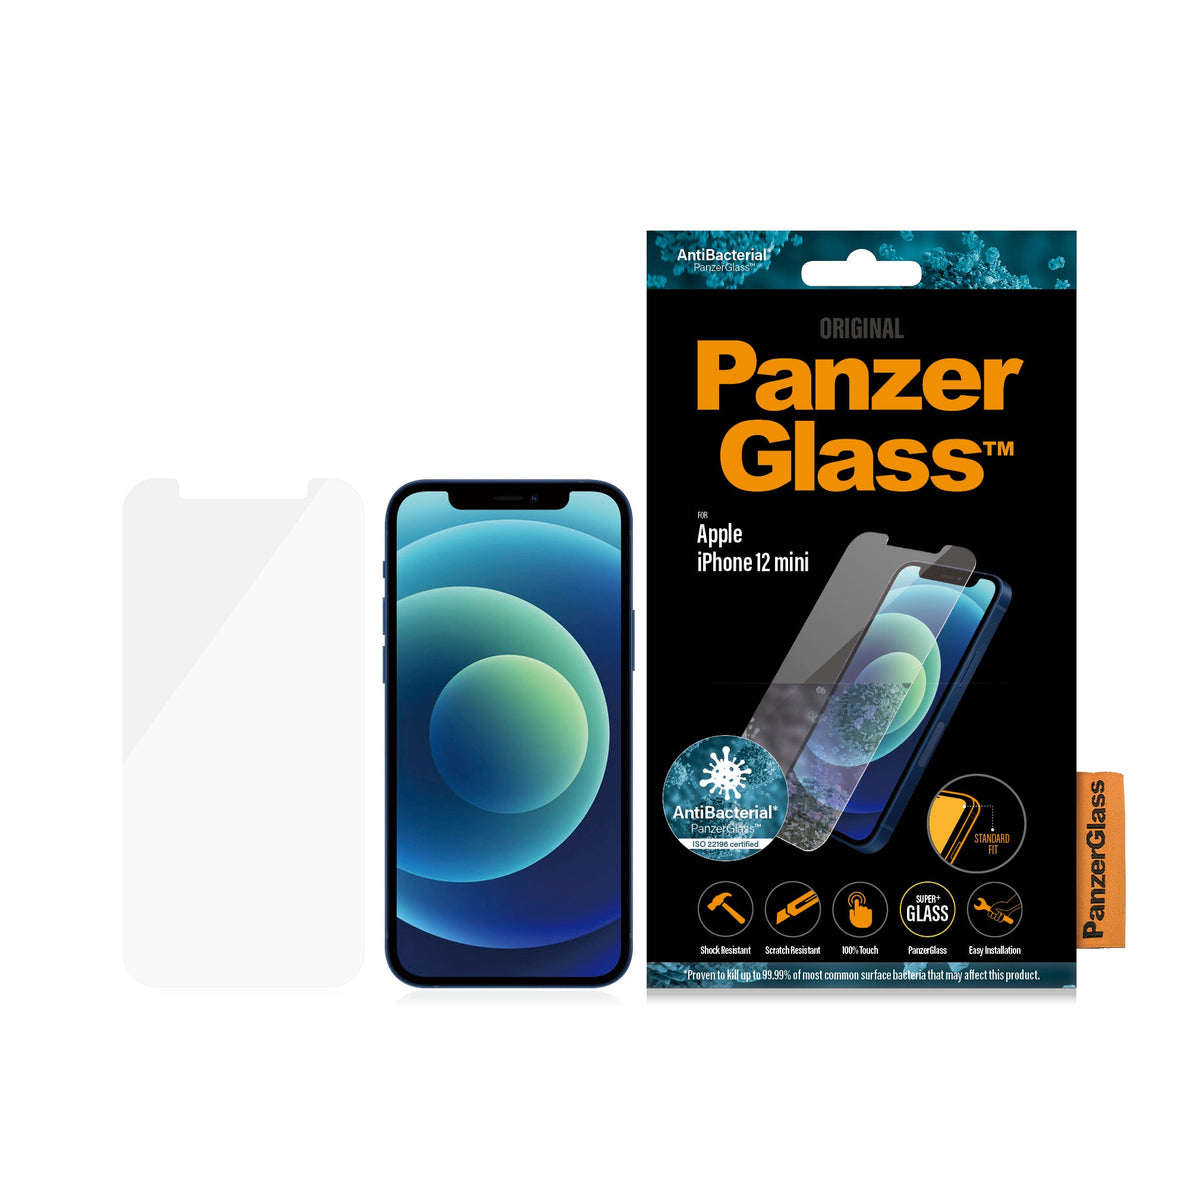 [OPEN BOX] PANZERGLASS iPhone 12 Mini - Standard Fit Tempered Glass Screen Protector w/ Anti-Microbial - Clear